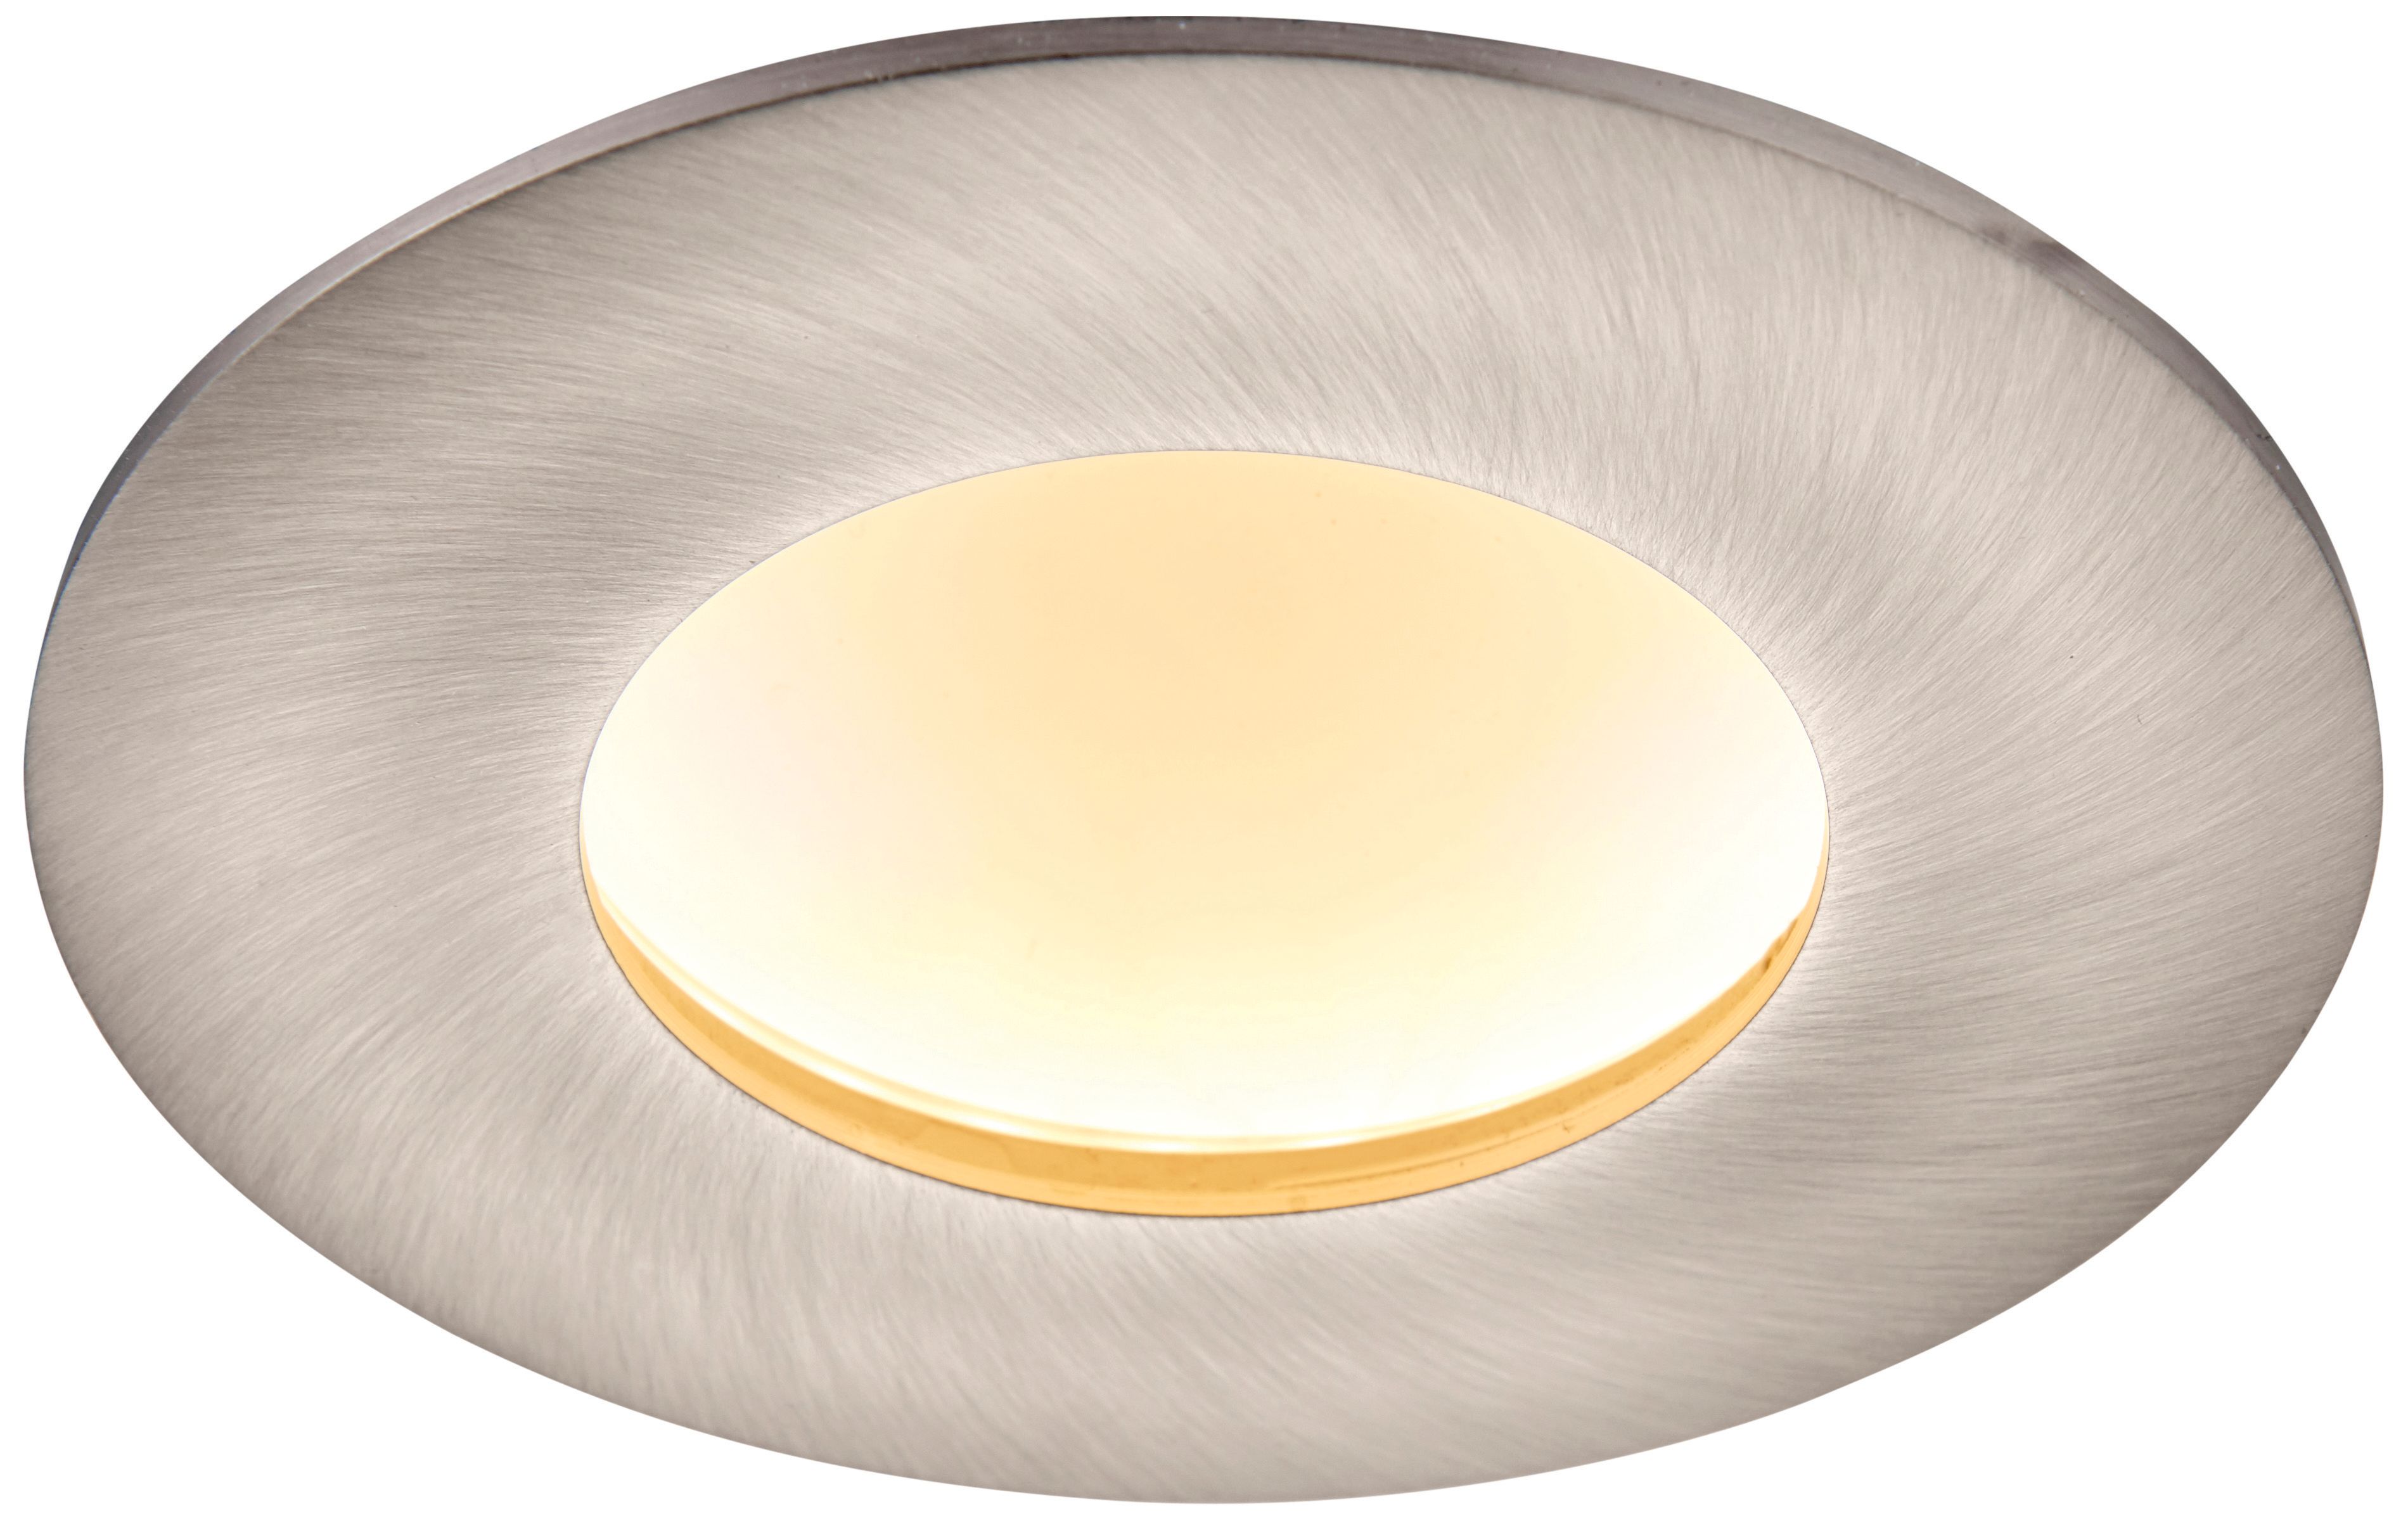 Saxby Orbital Plus LED Anti Glare Fire Rated IP65 Warm White Dimmable Downlight 9W - Brushed Nickel